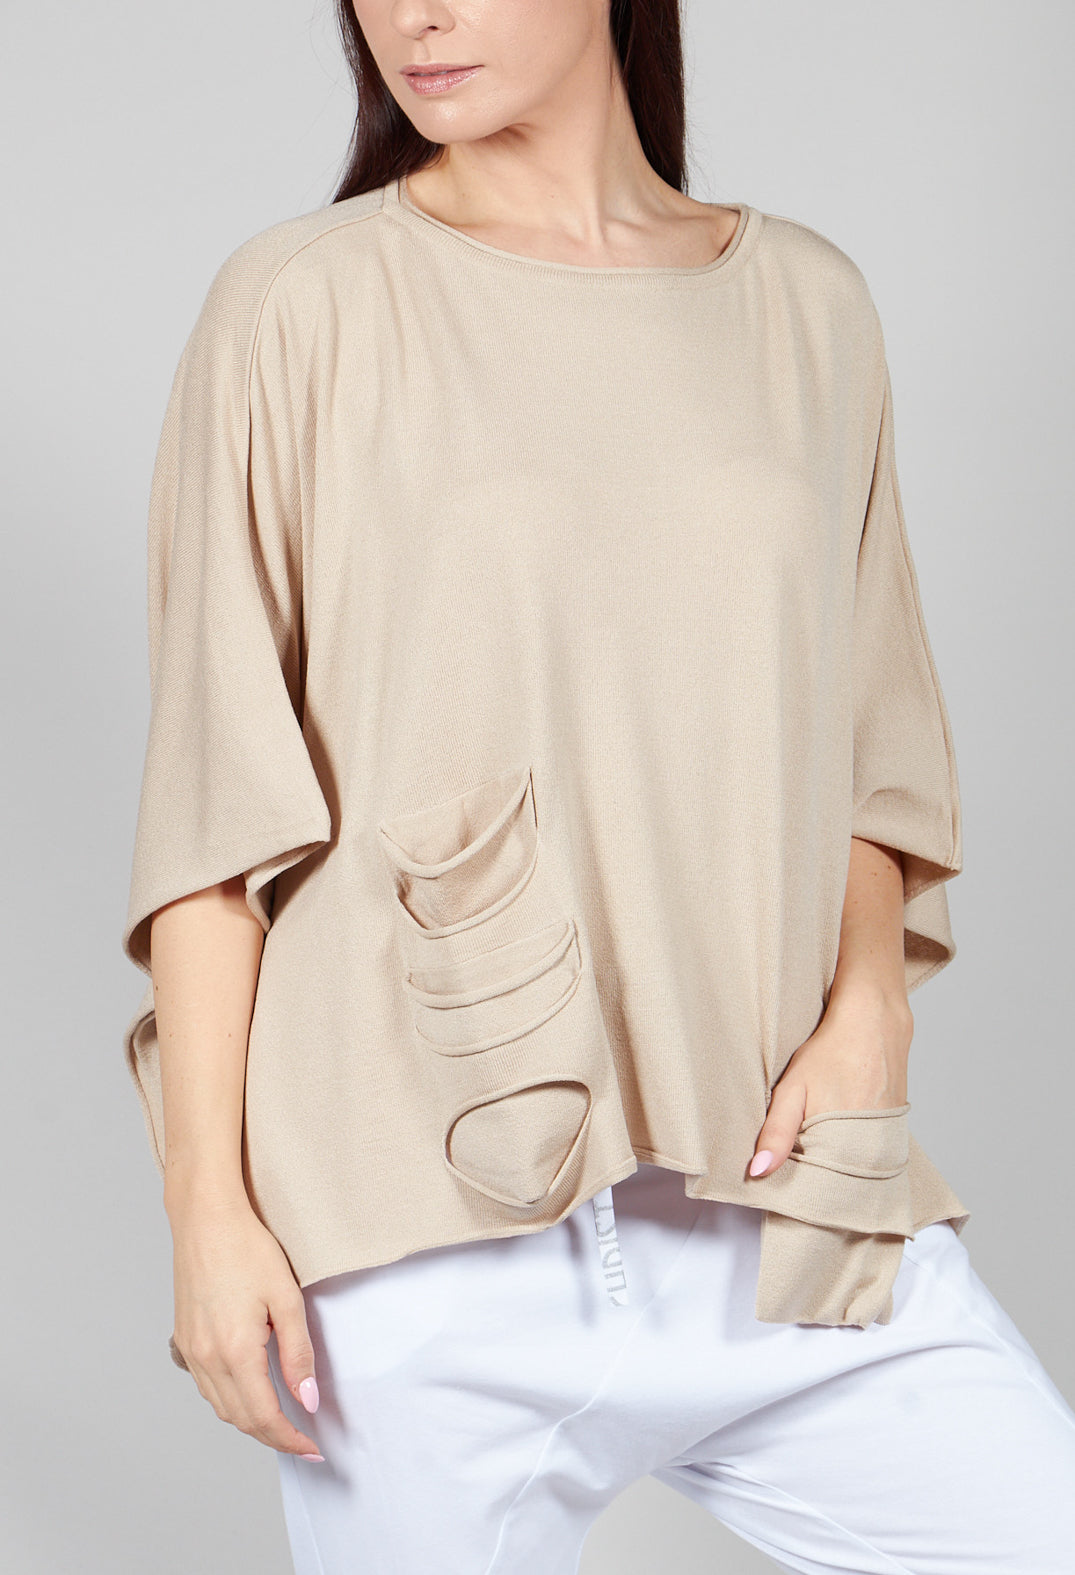 Cape Style Jumper in Sand